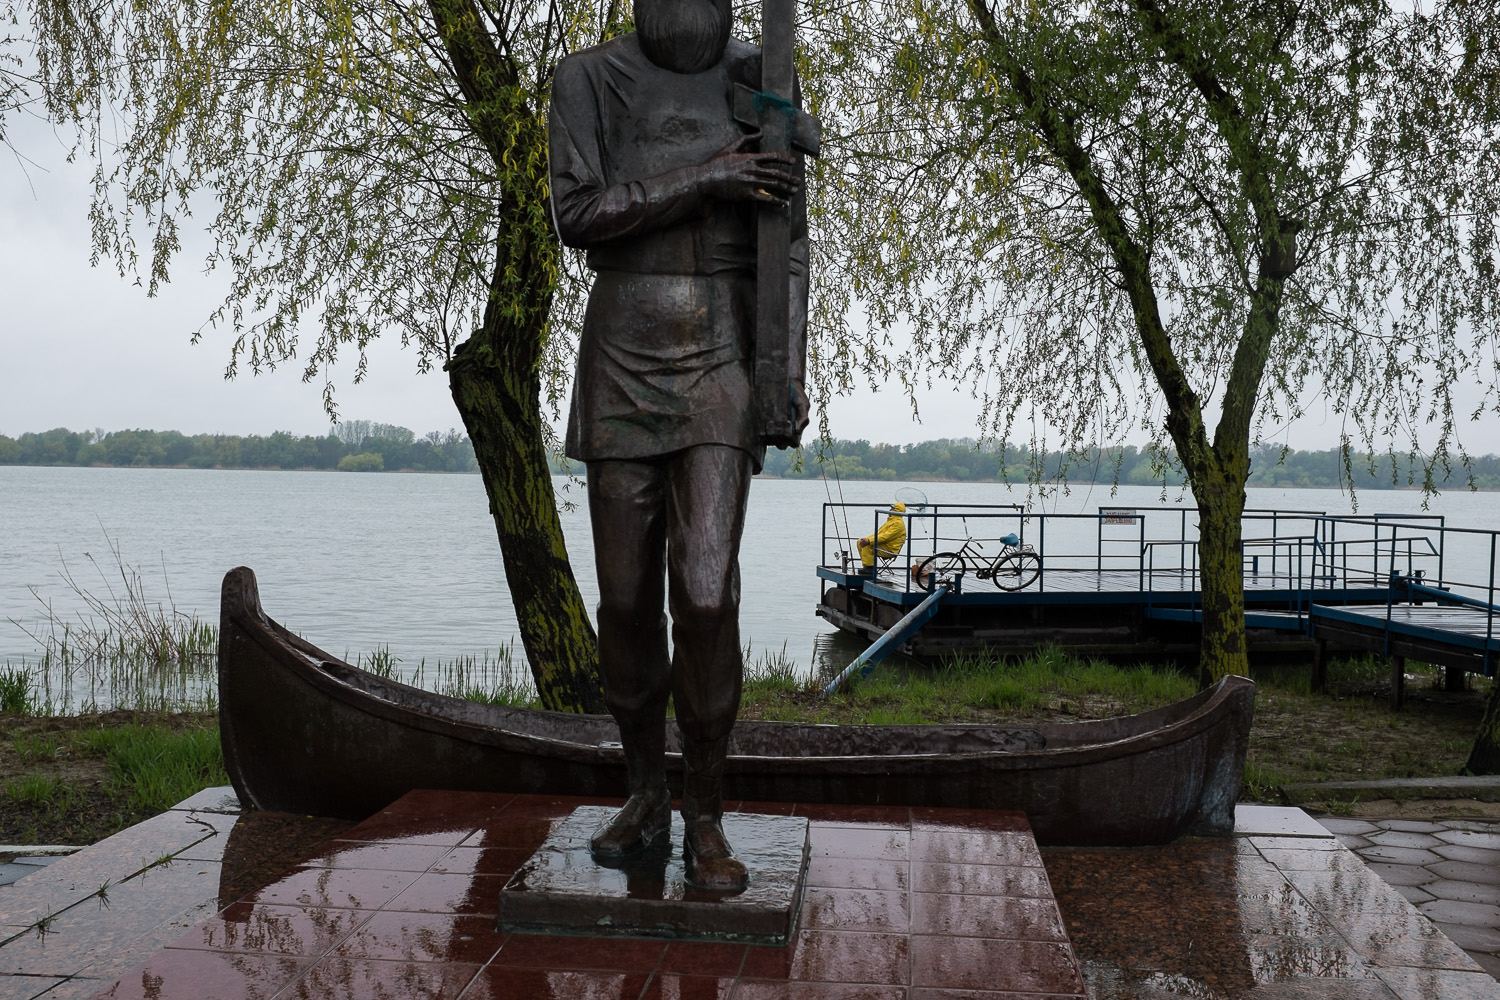  A man fishes in the Danube at Vilkovo near a statue commemorating early Lipovan settlers to the region. The Lipovans - Orthodox Old Believers - came to this corner of Ukraine after the schism of the Russian Orthodox Church, caused by the reforms of 